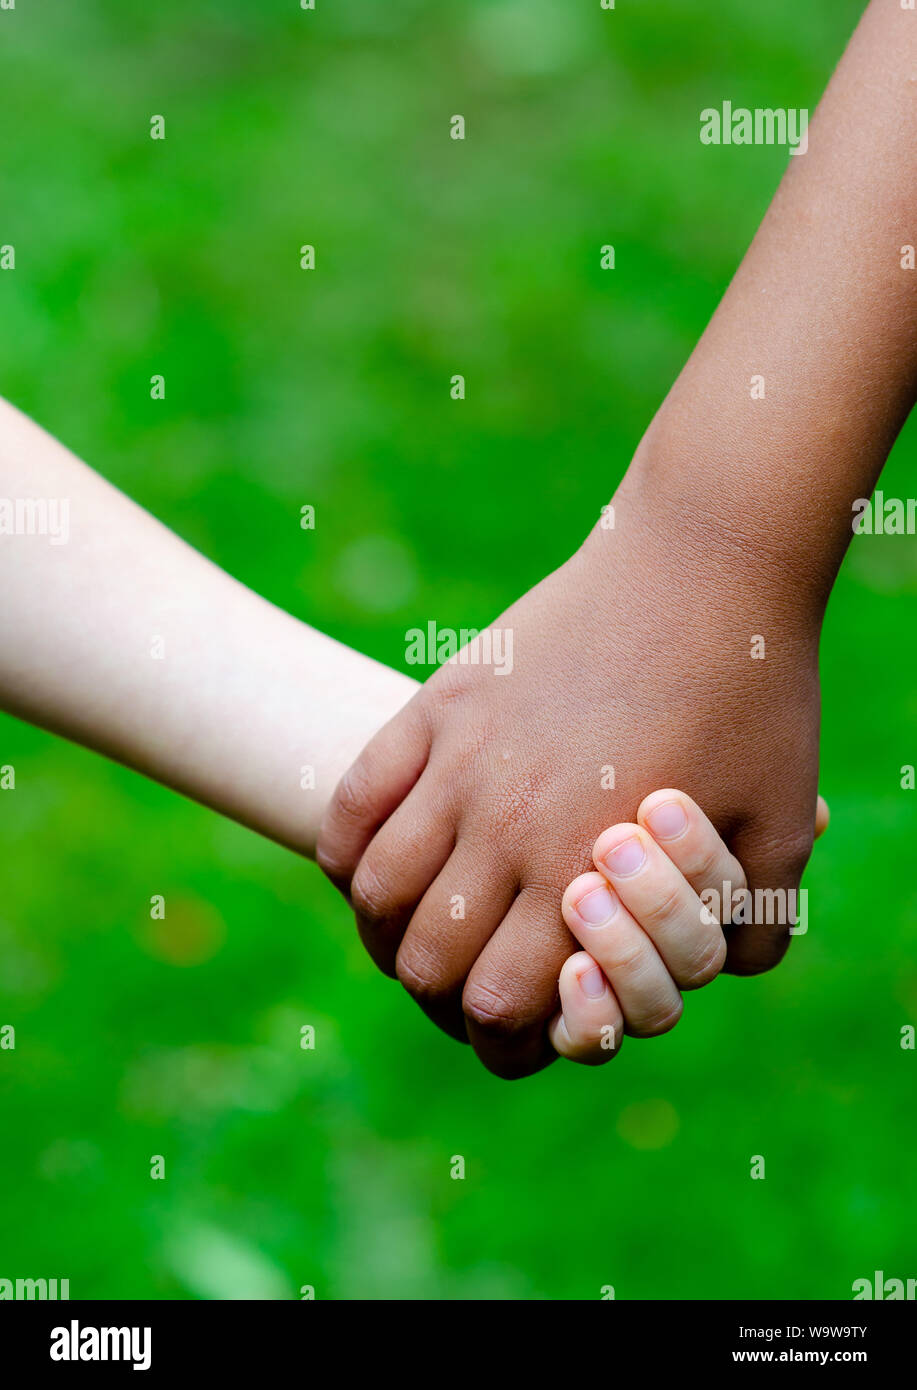 Boy and girl of different races hold hands together. Boy is Caucasian (white) and the girl is black. Concept for friendship, peace, support, equality. Stock Photo